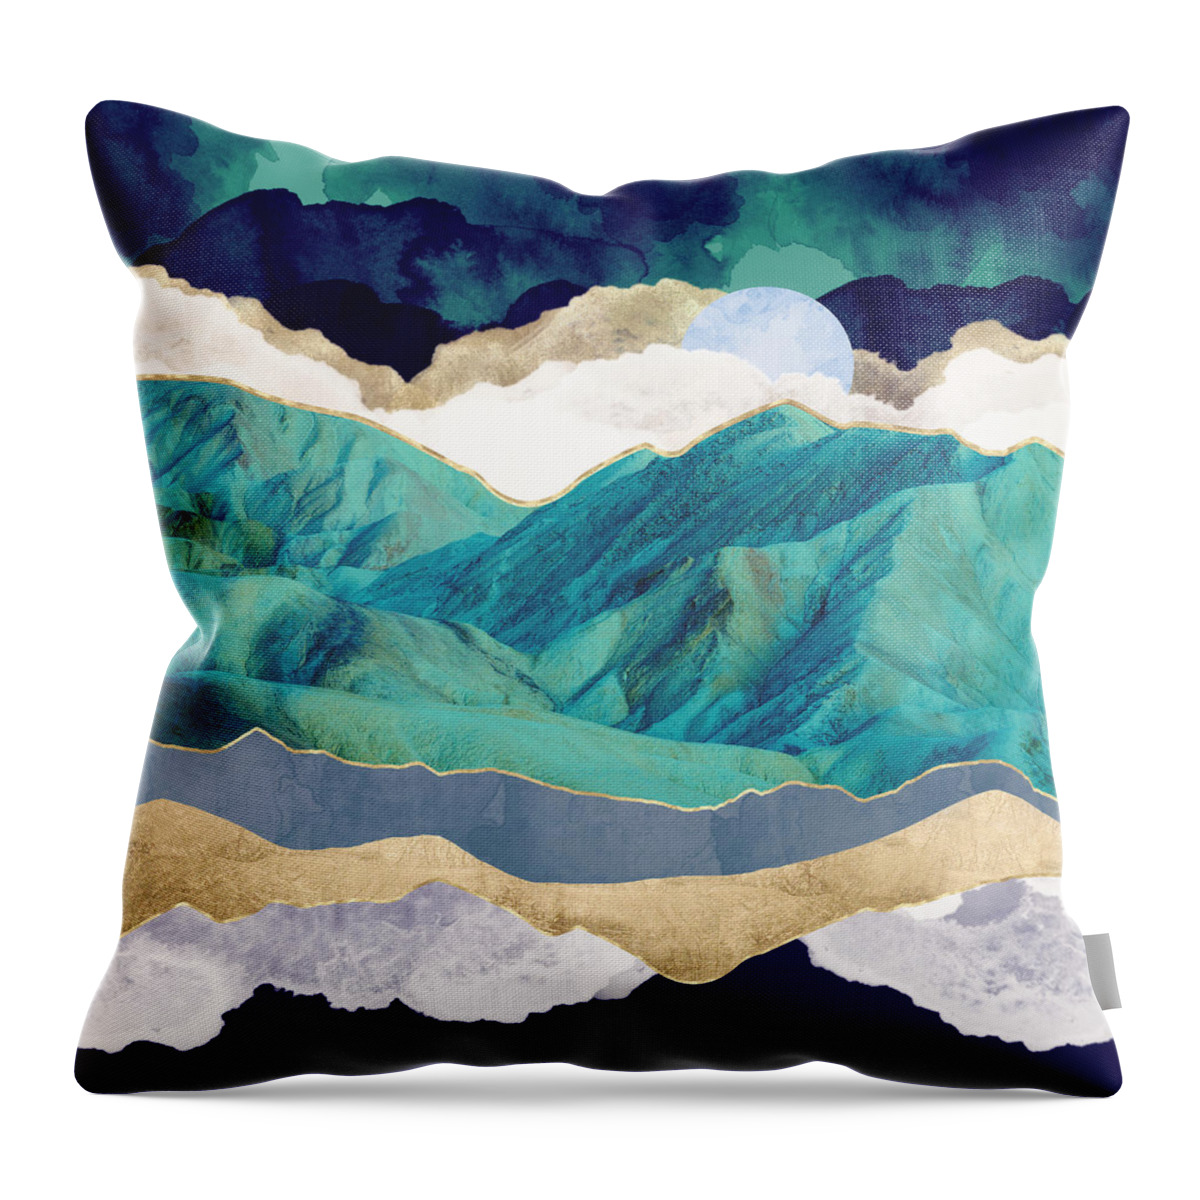 Digital Throw Pillow featuring the digital art Teal Mountains by Spacefrog Designs